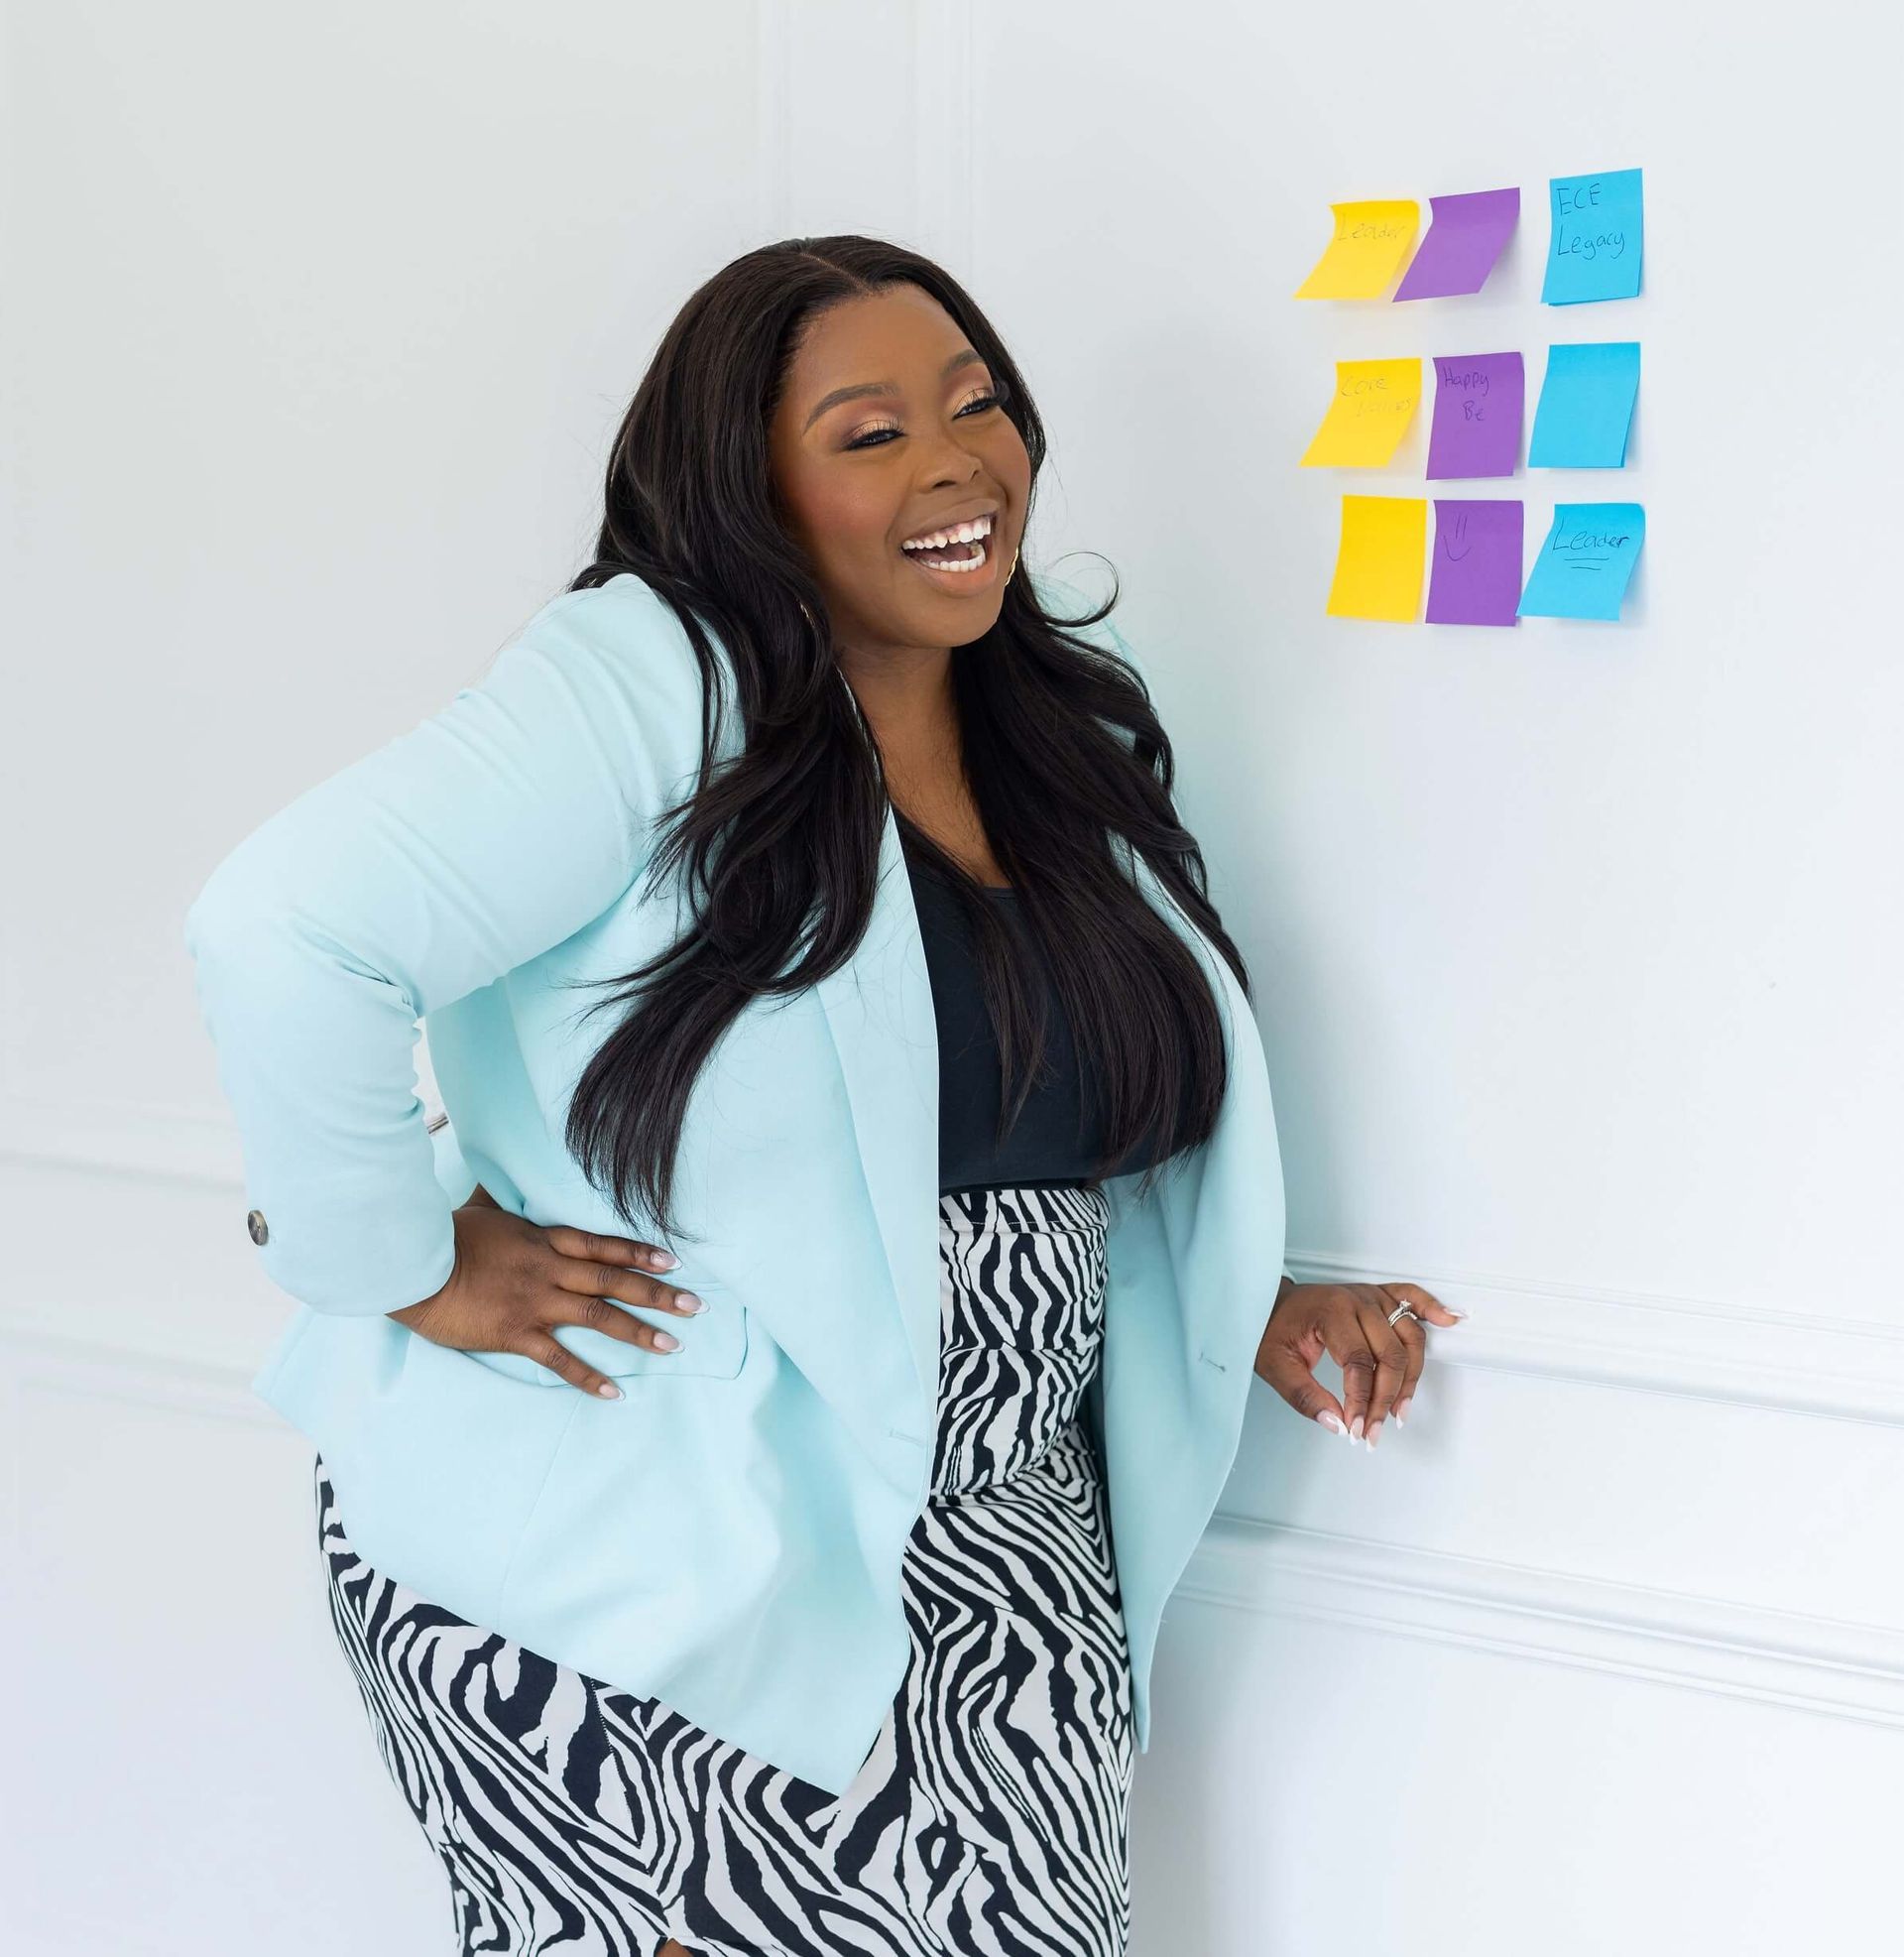 Anisha Angella, the Early Childhood Coach, smiling against a wall with post-it notes on it